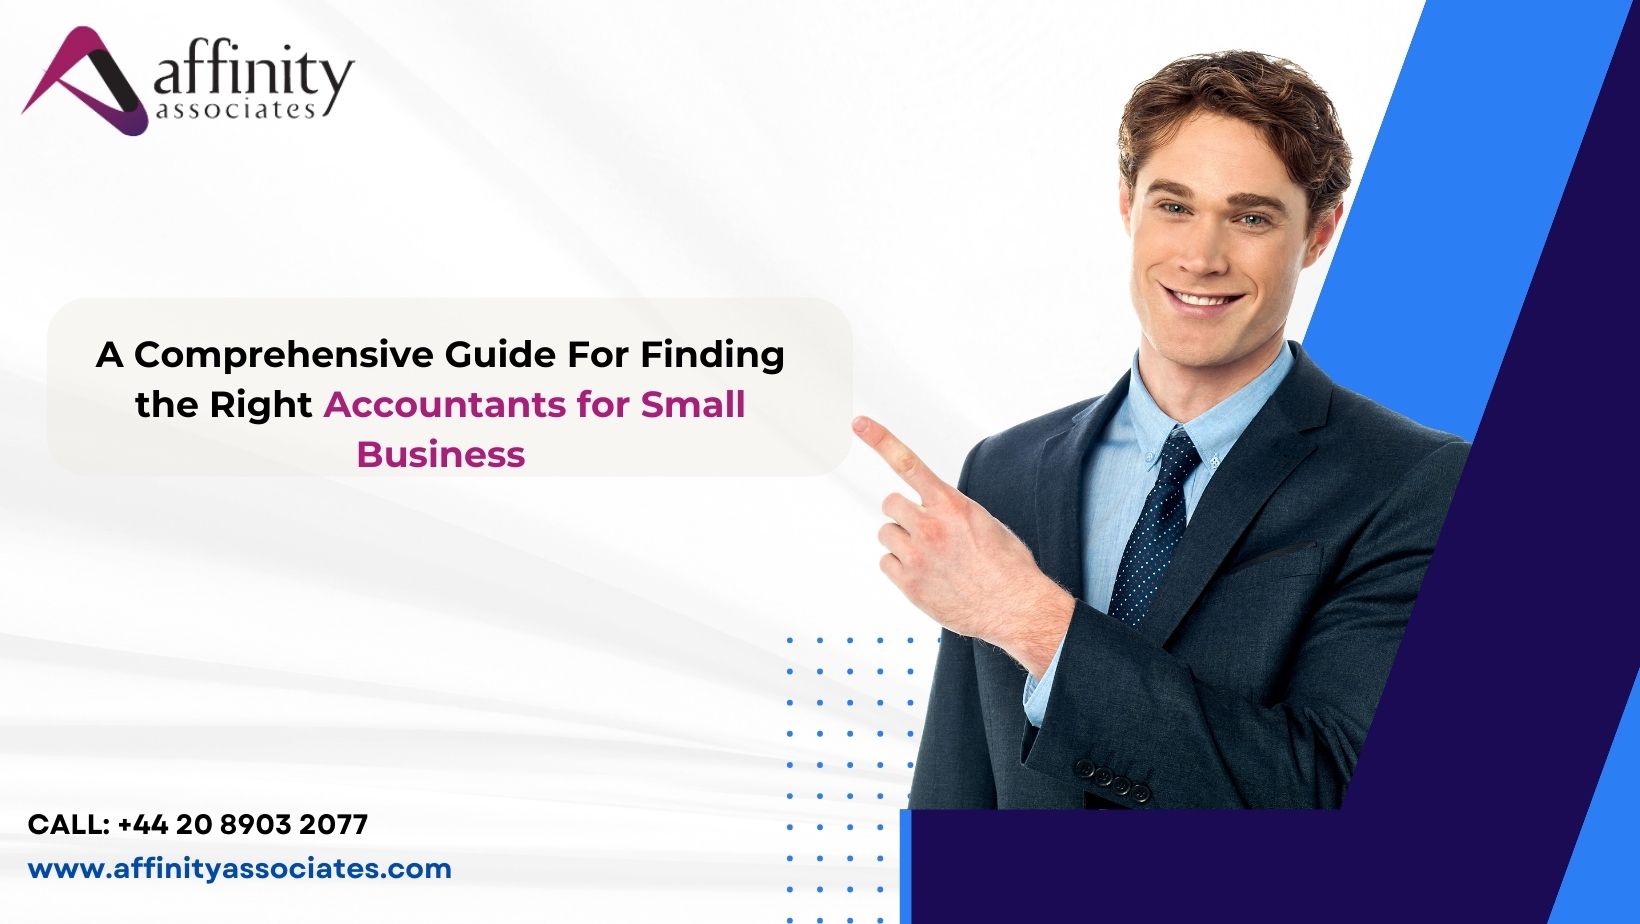 A Comprehensive Guide For Finding the Right Accountants for Small Business